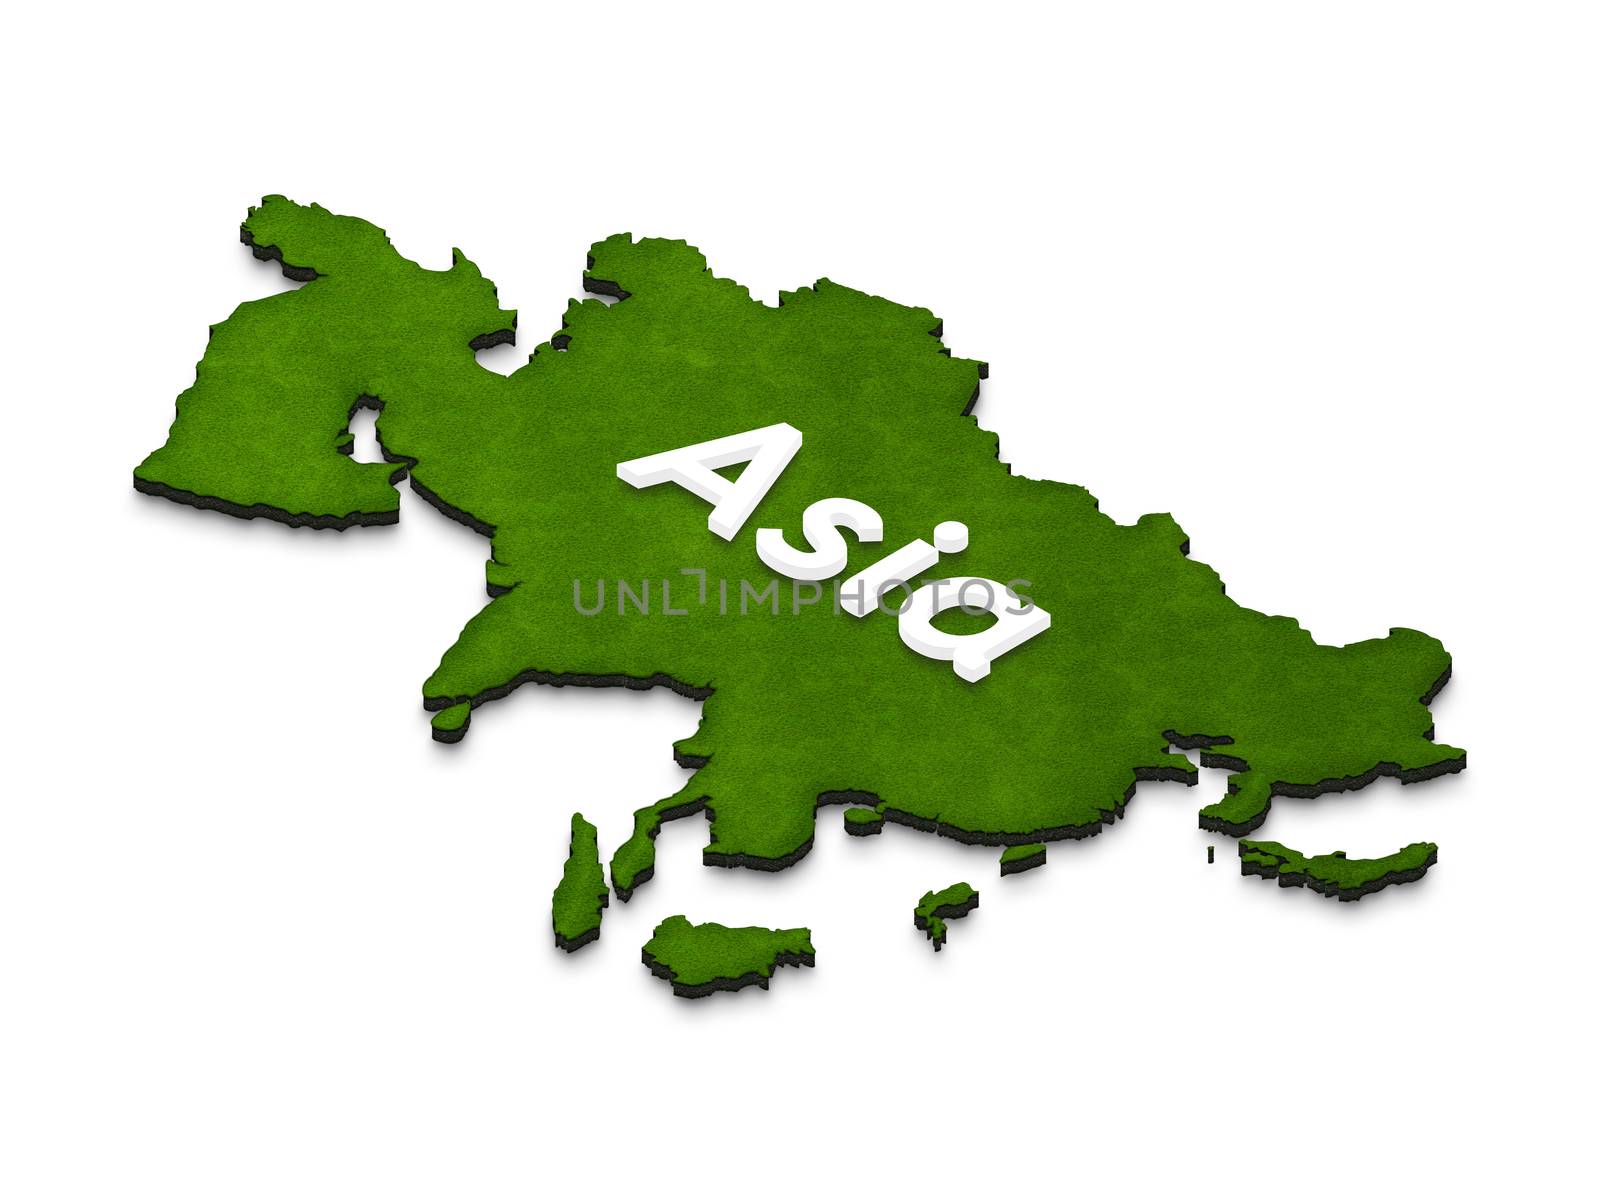 Map of Asia. 3D isometric illustration. by sanches812